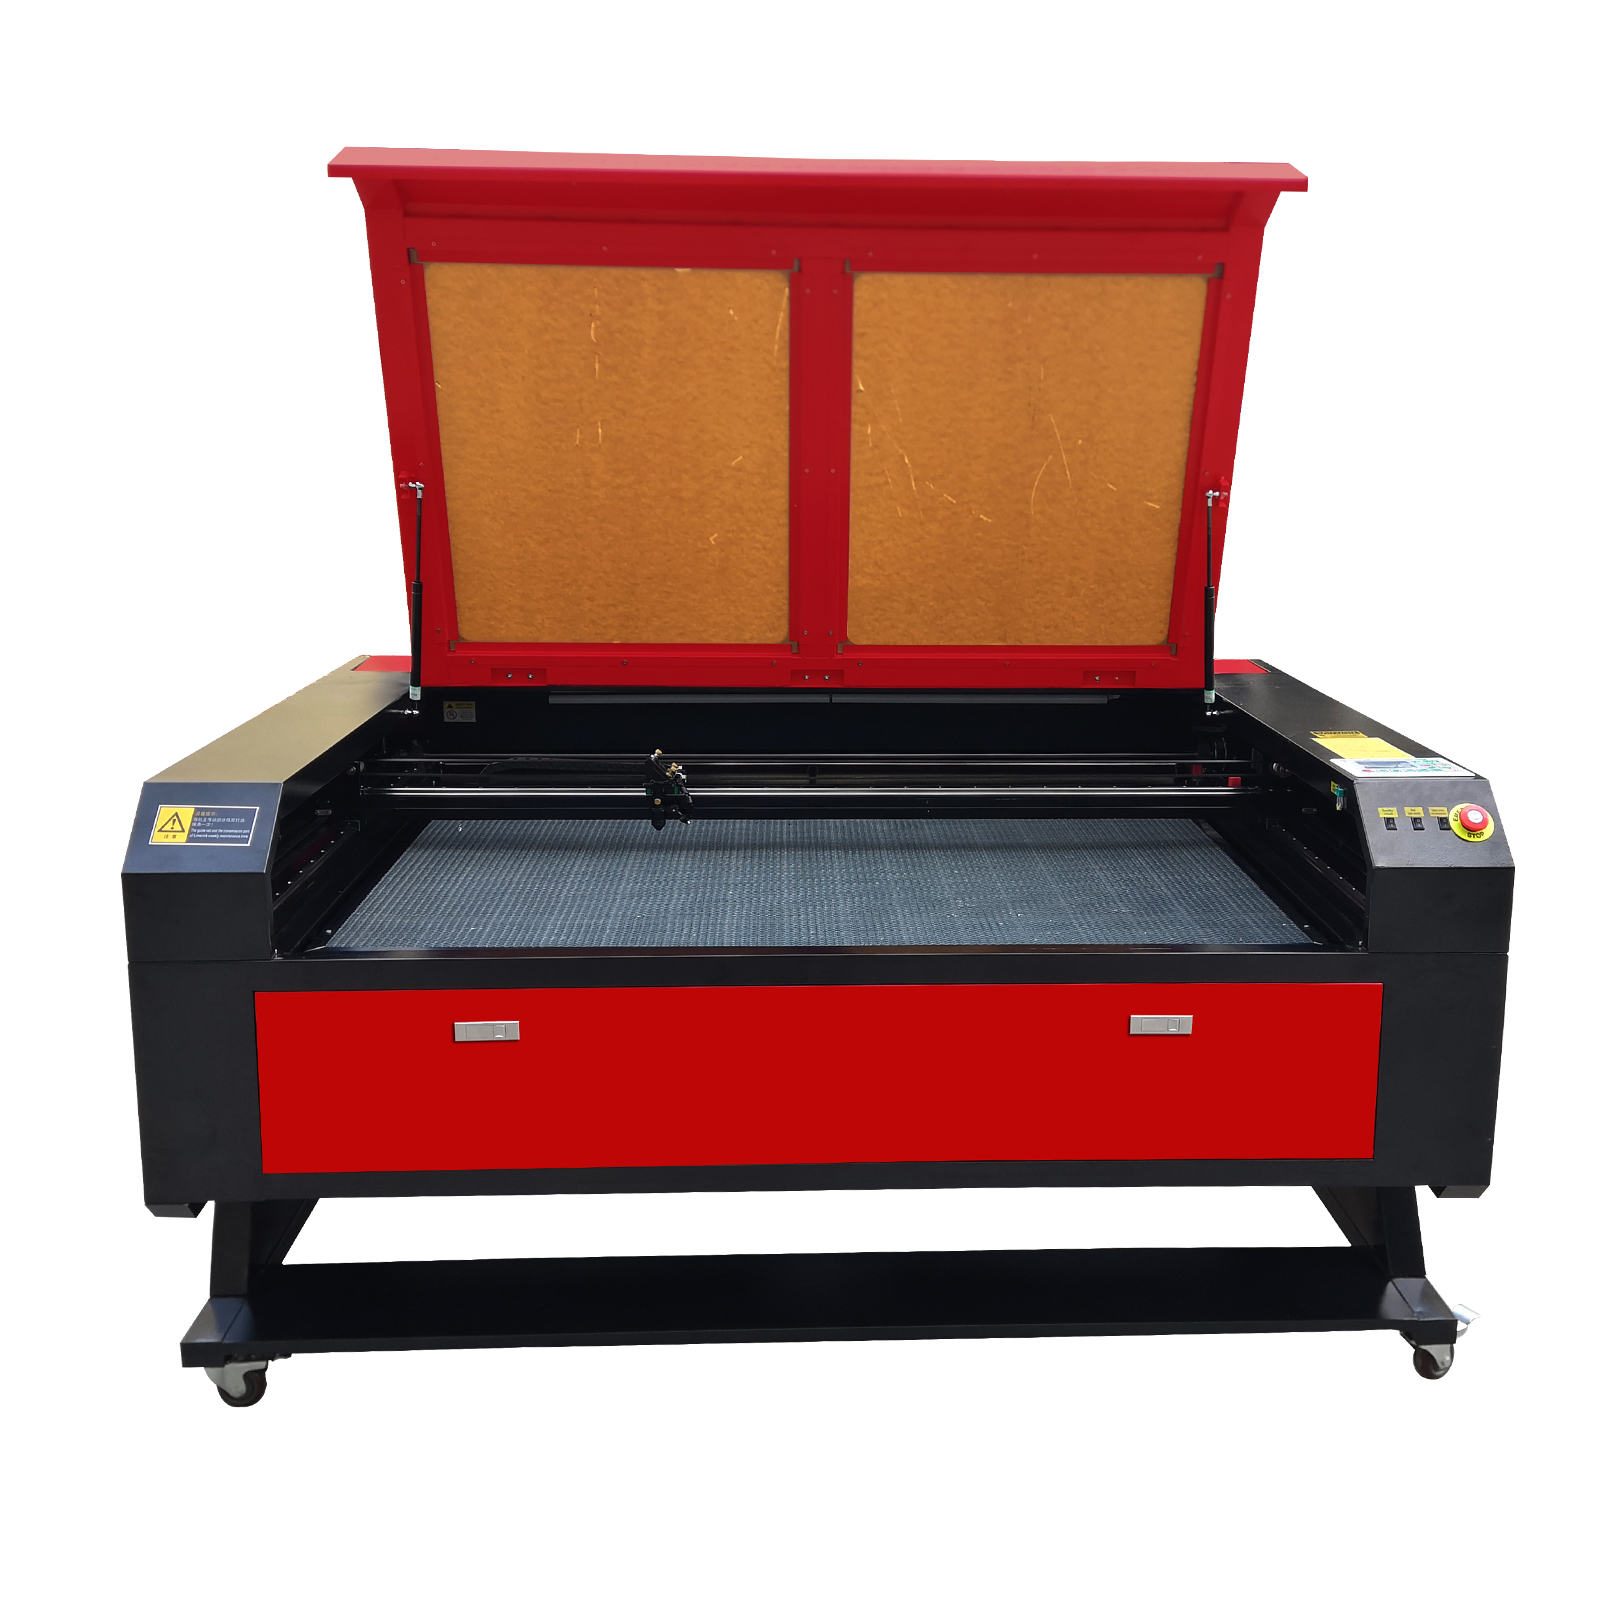 130W CO2 Laser Engraver Machine with Auto Focus 55 x 35-1/2 Inche Laser Cutting Machine With Ruida DSP RDWorks V8 Compatible With LightBurn Software